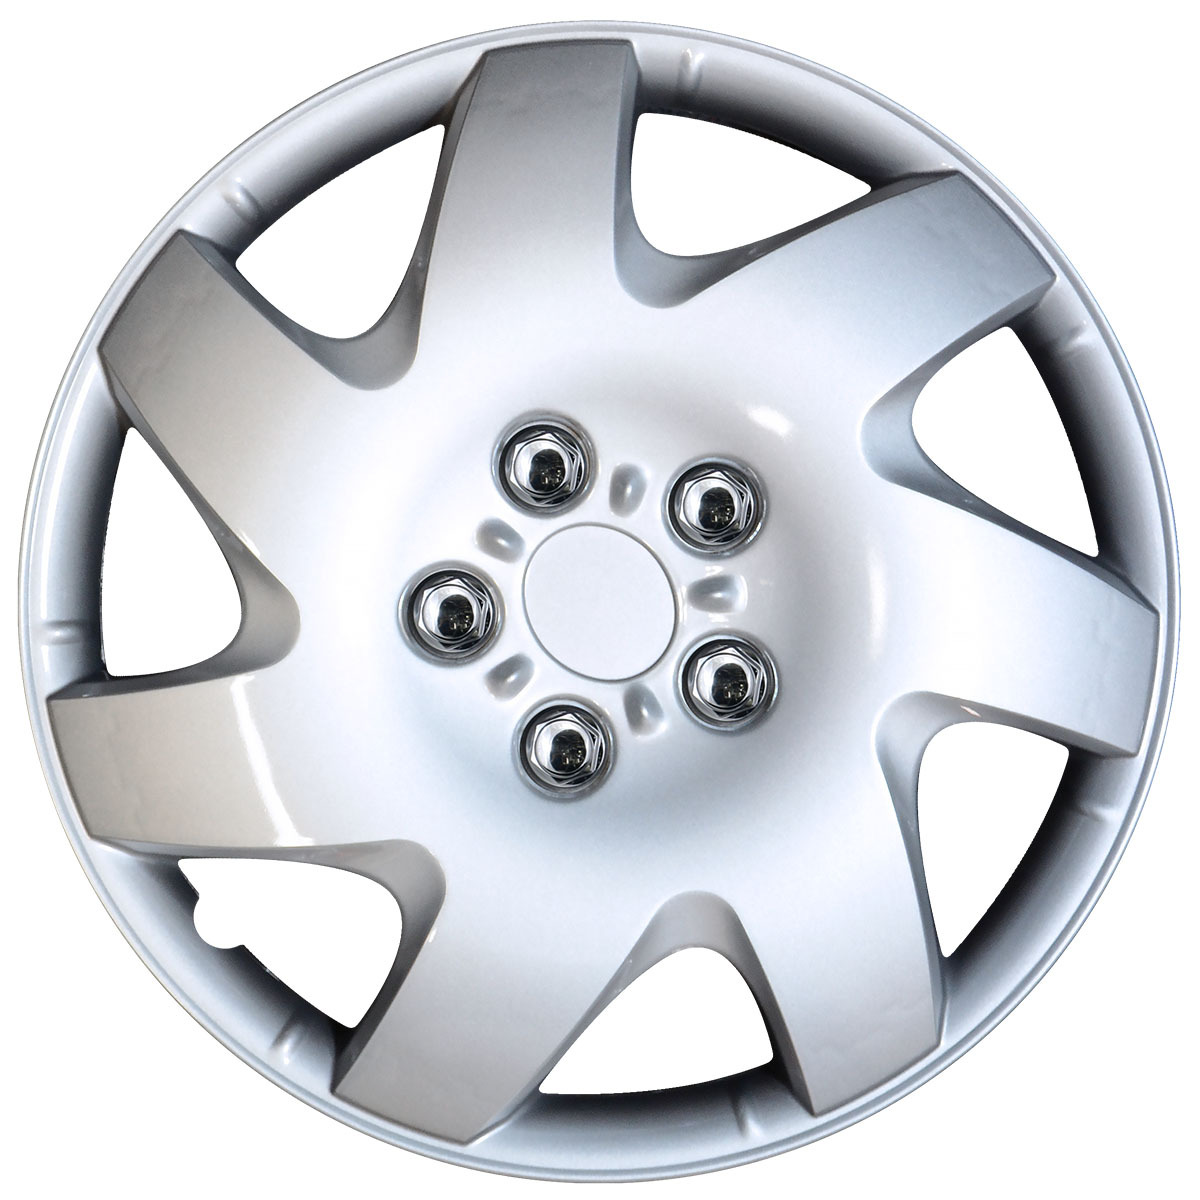 NLA Image 14" Wheel Covers - Silver